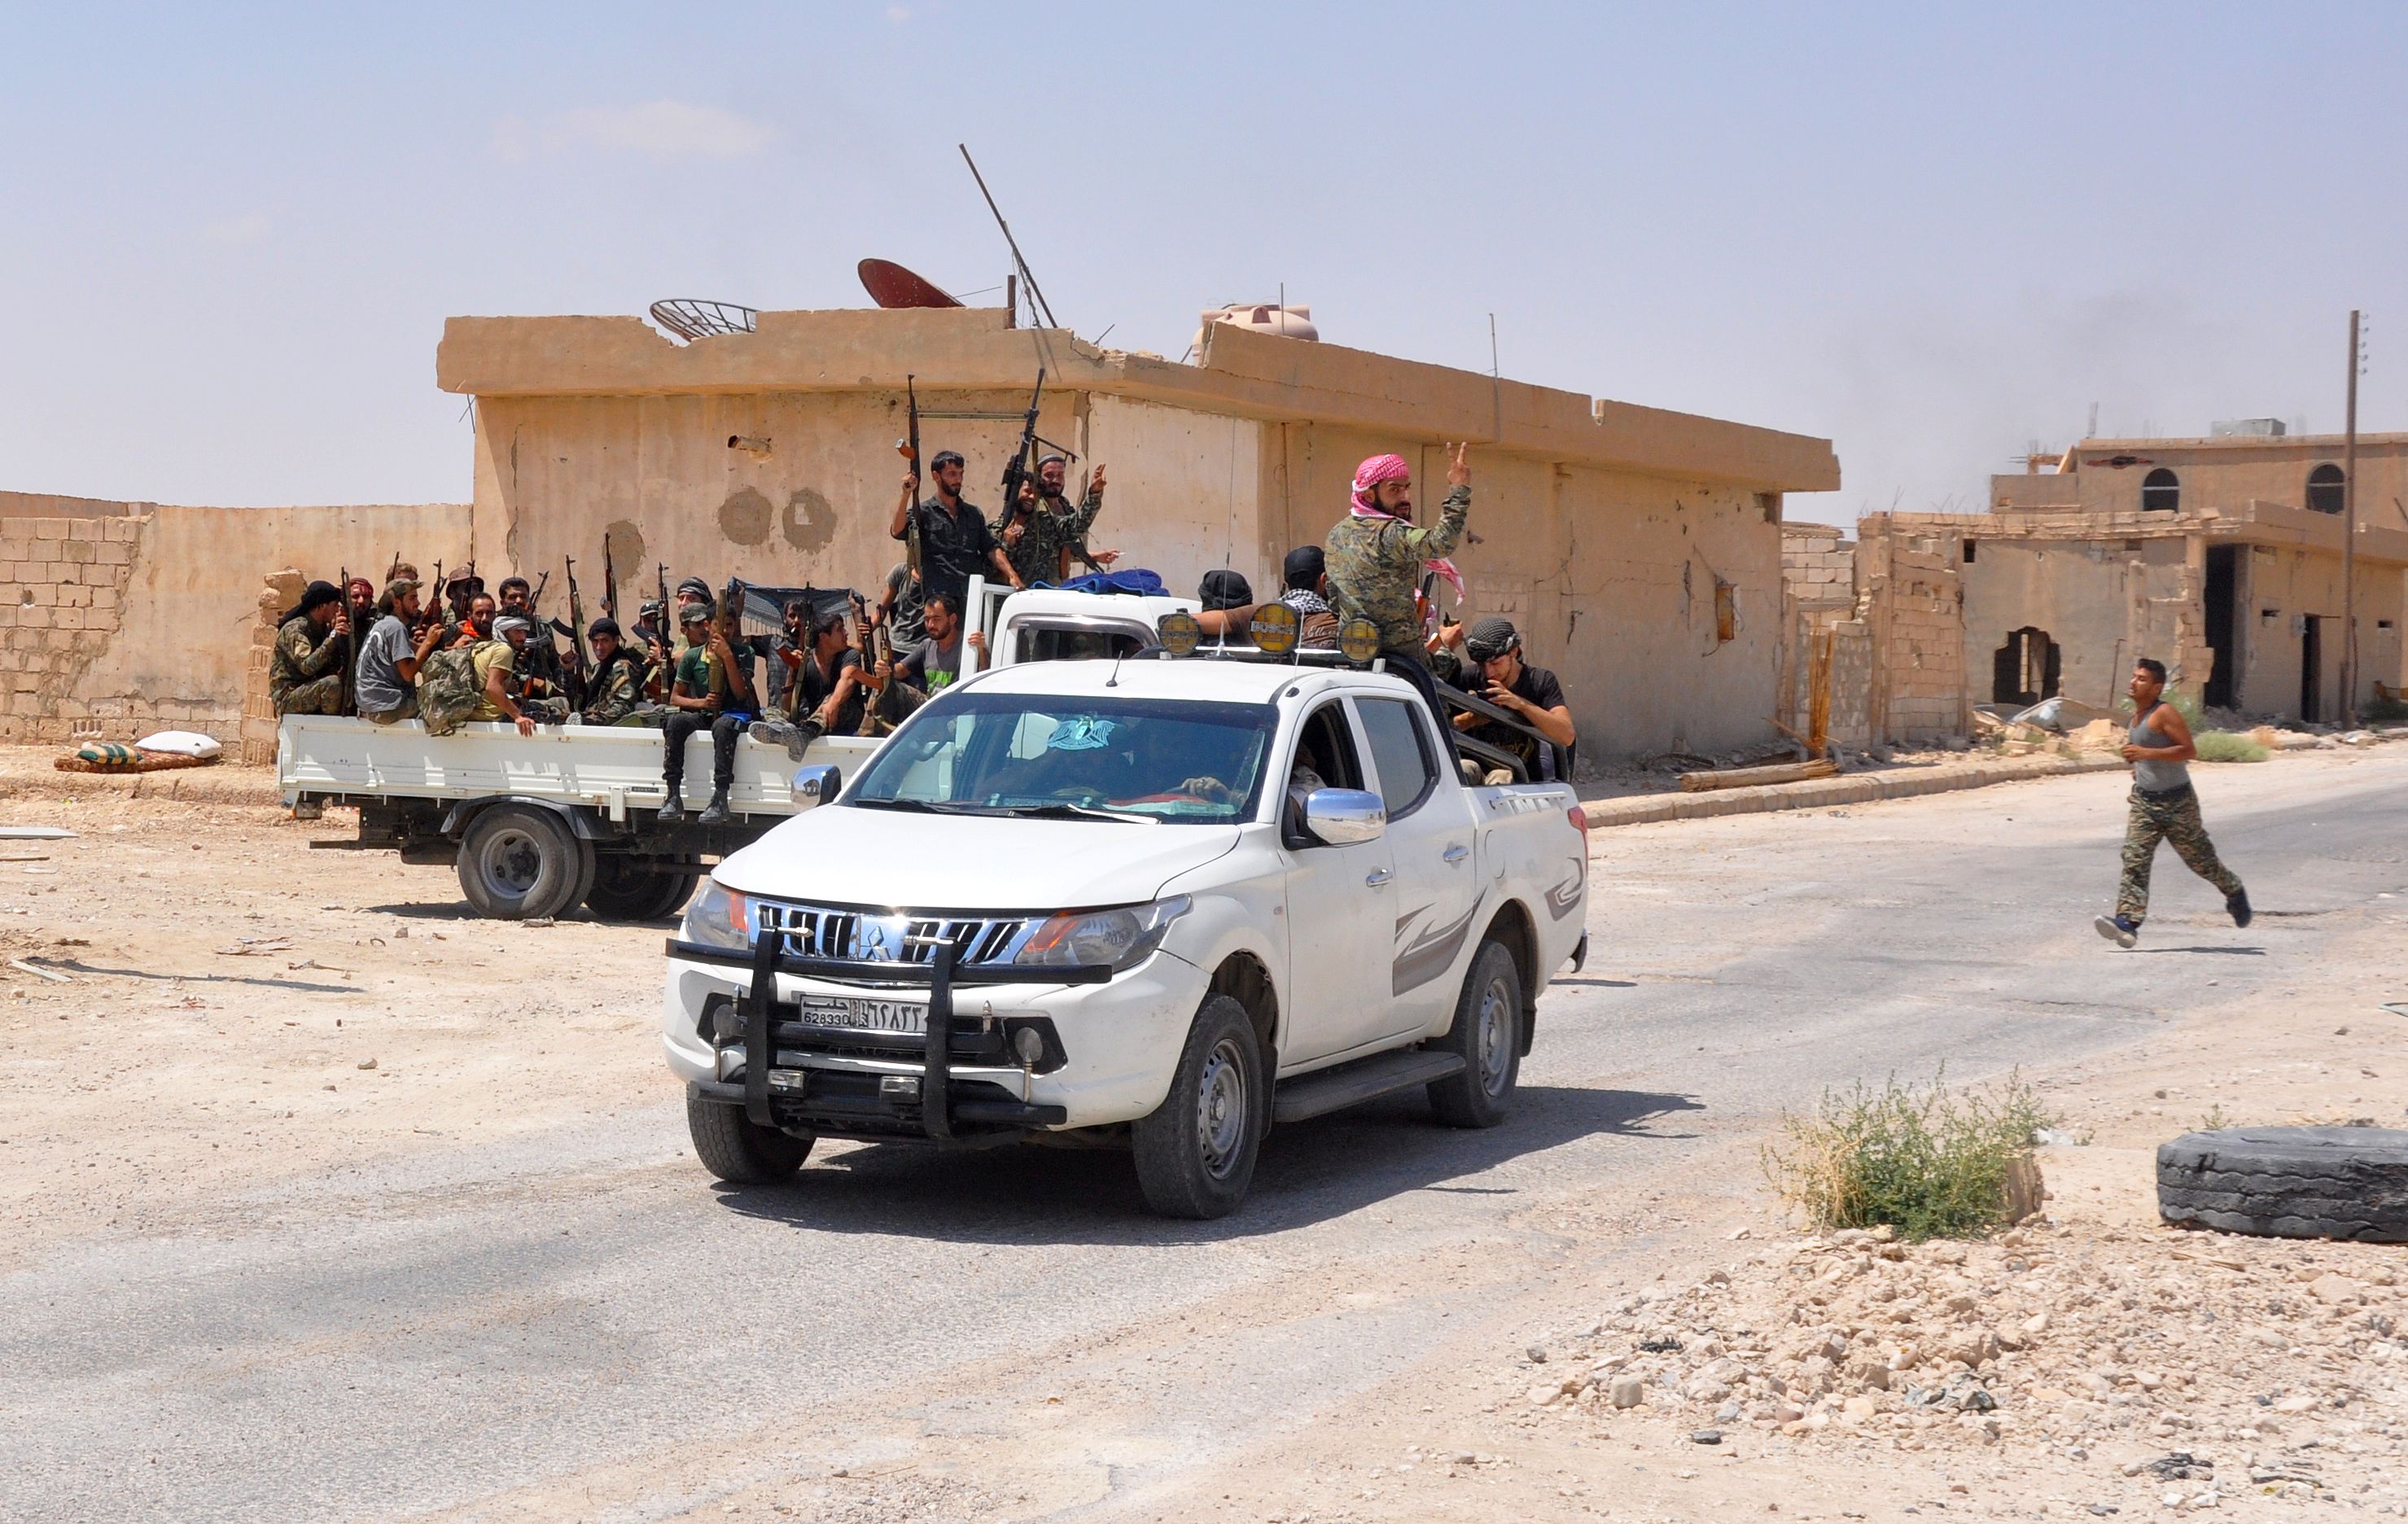 Photo above: Pro-government fighters sit in the back of vehicles brandishing their weapons and flashing the sign for victory in the central Syrian town of al-Sukhnah, situated in the county’s large desert area called the Badia, on August 13, 2017 as they clear the area after taking control of the city from Islamic State group fighters. Photo by STRINGER/AFP via Getty Images.